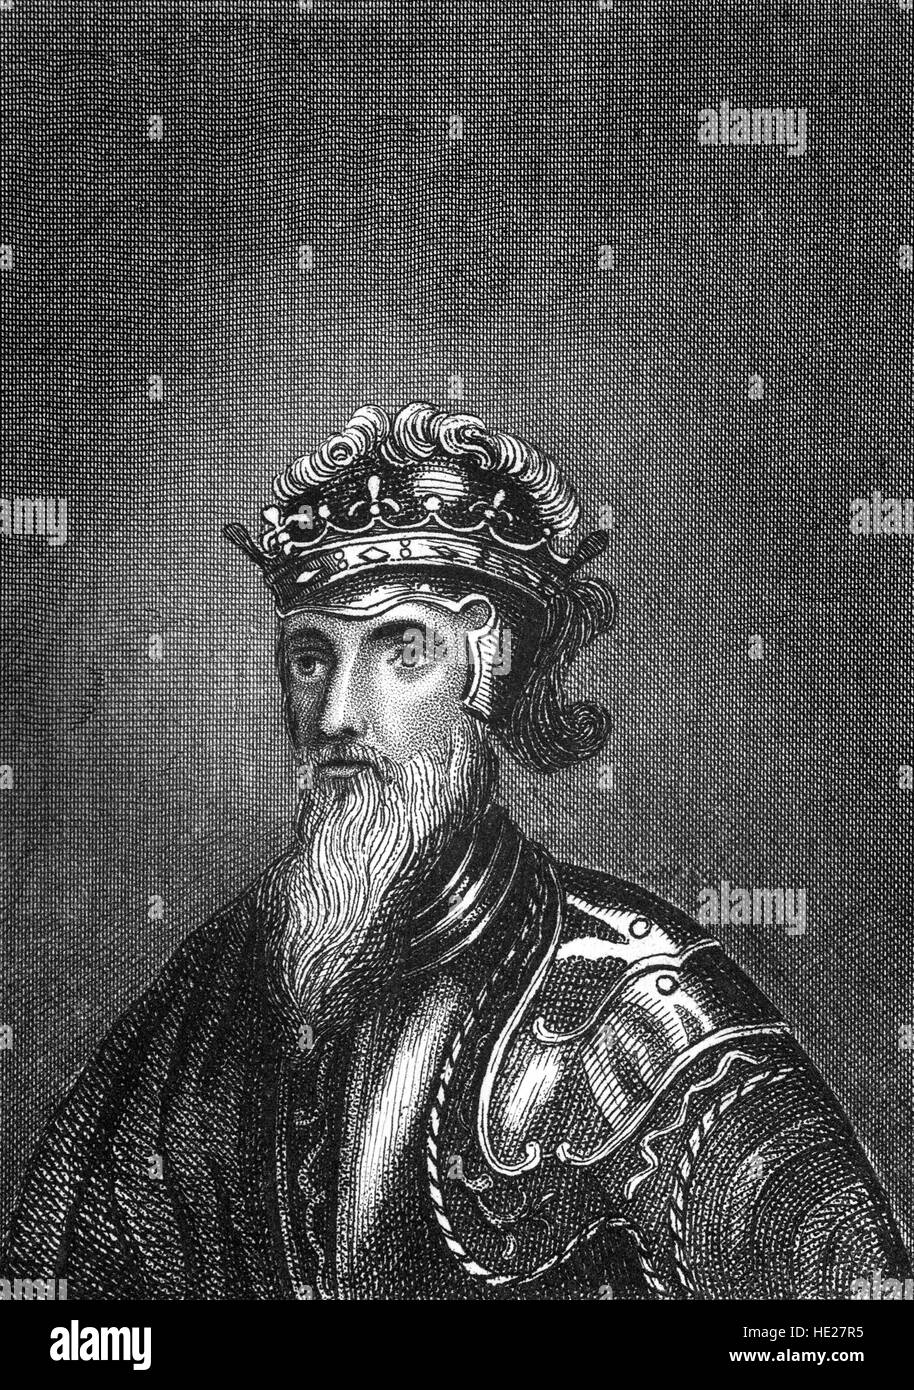 Edward III (1312 – 1377) was King of England from 25 January 1327 until his death. He is noted for his military success and for restoring royal authority after the disastrous and unorthodox reign of his father, Edward II. His long reign of fifty years was the second longest in medieval England and saw vital developments in legislation and government—in particular the evolution of the English parliament. Stock Photo